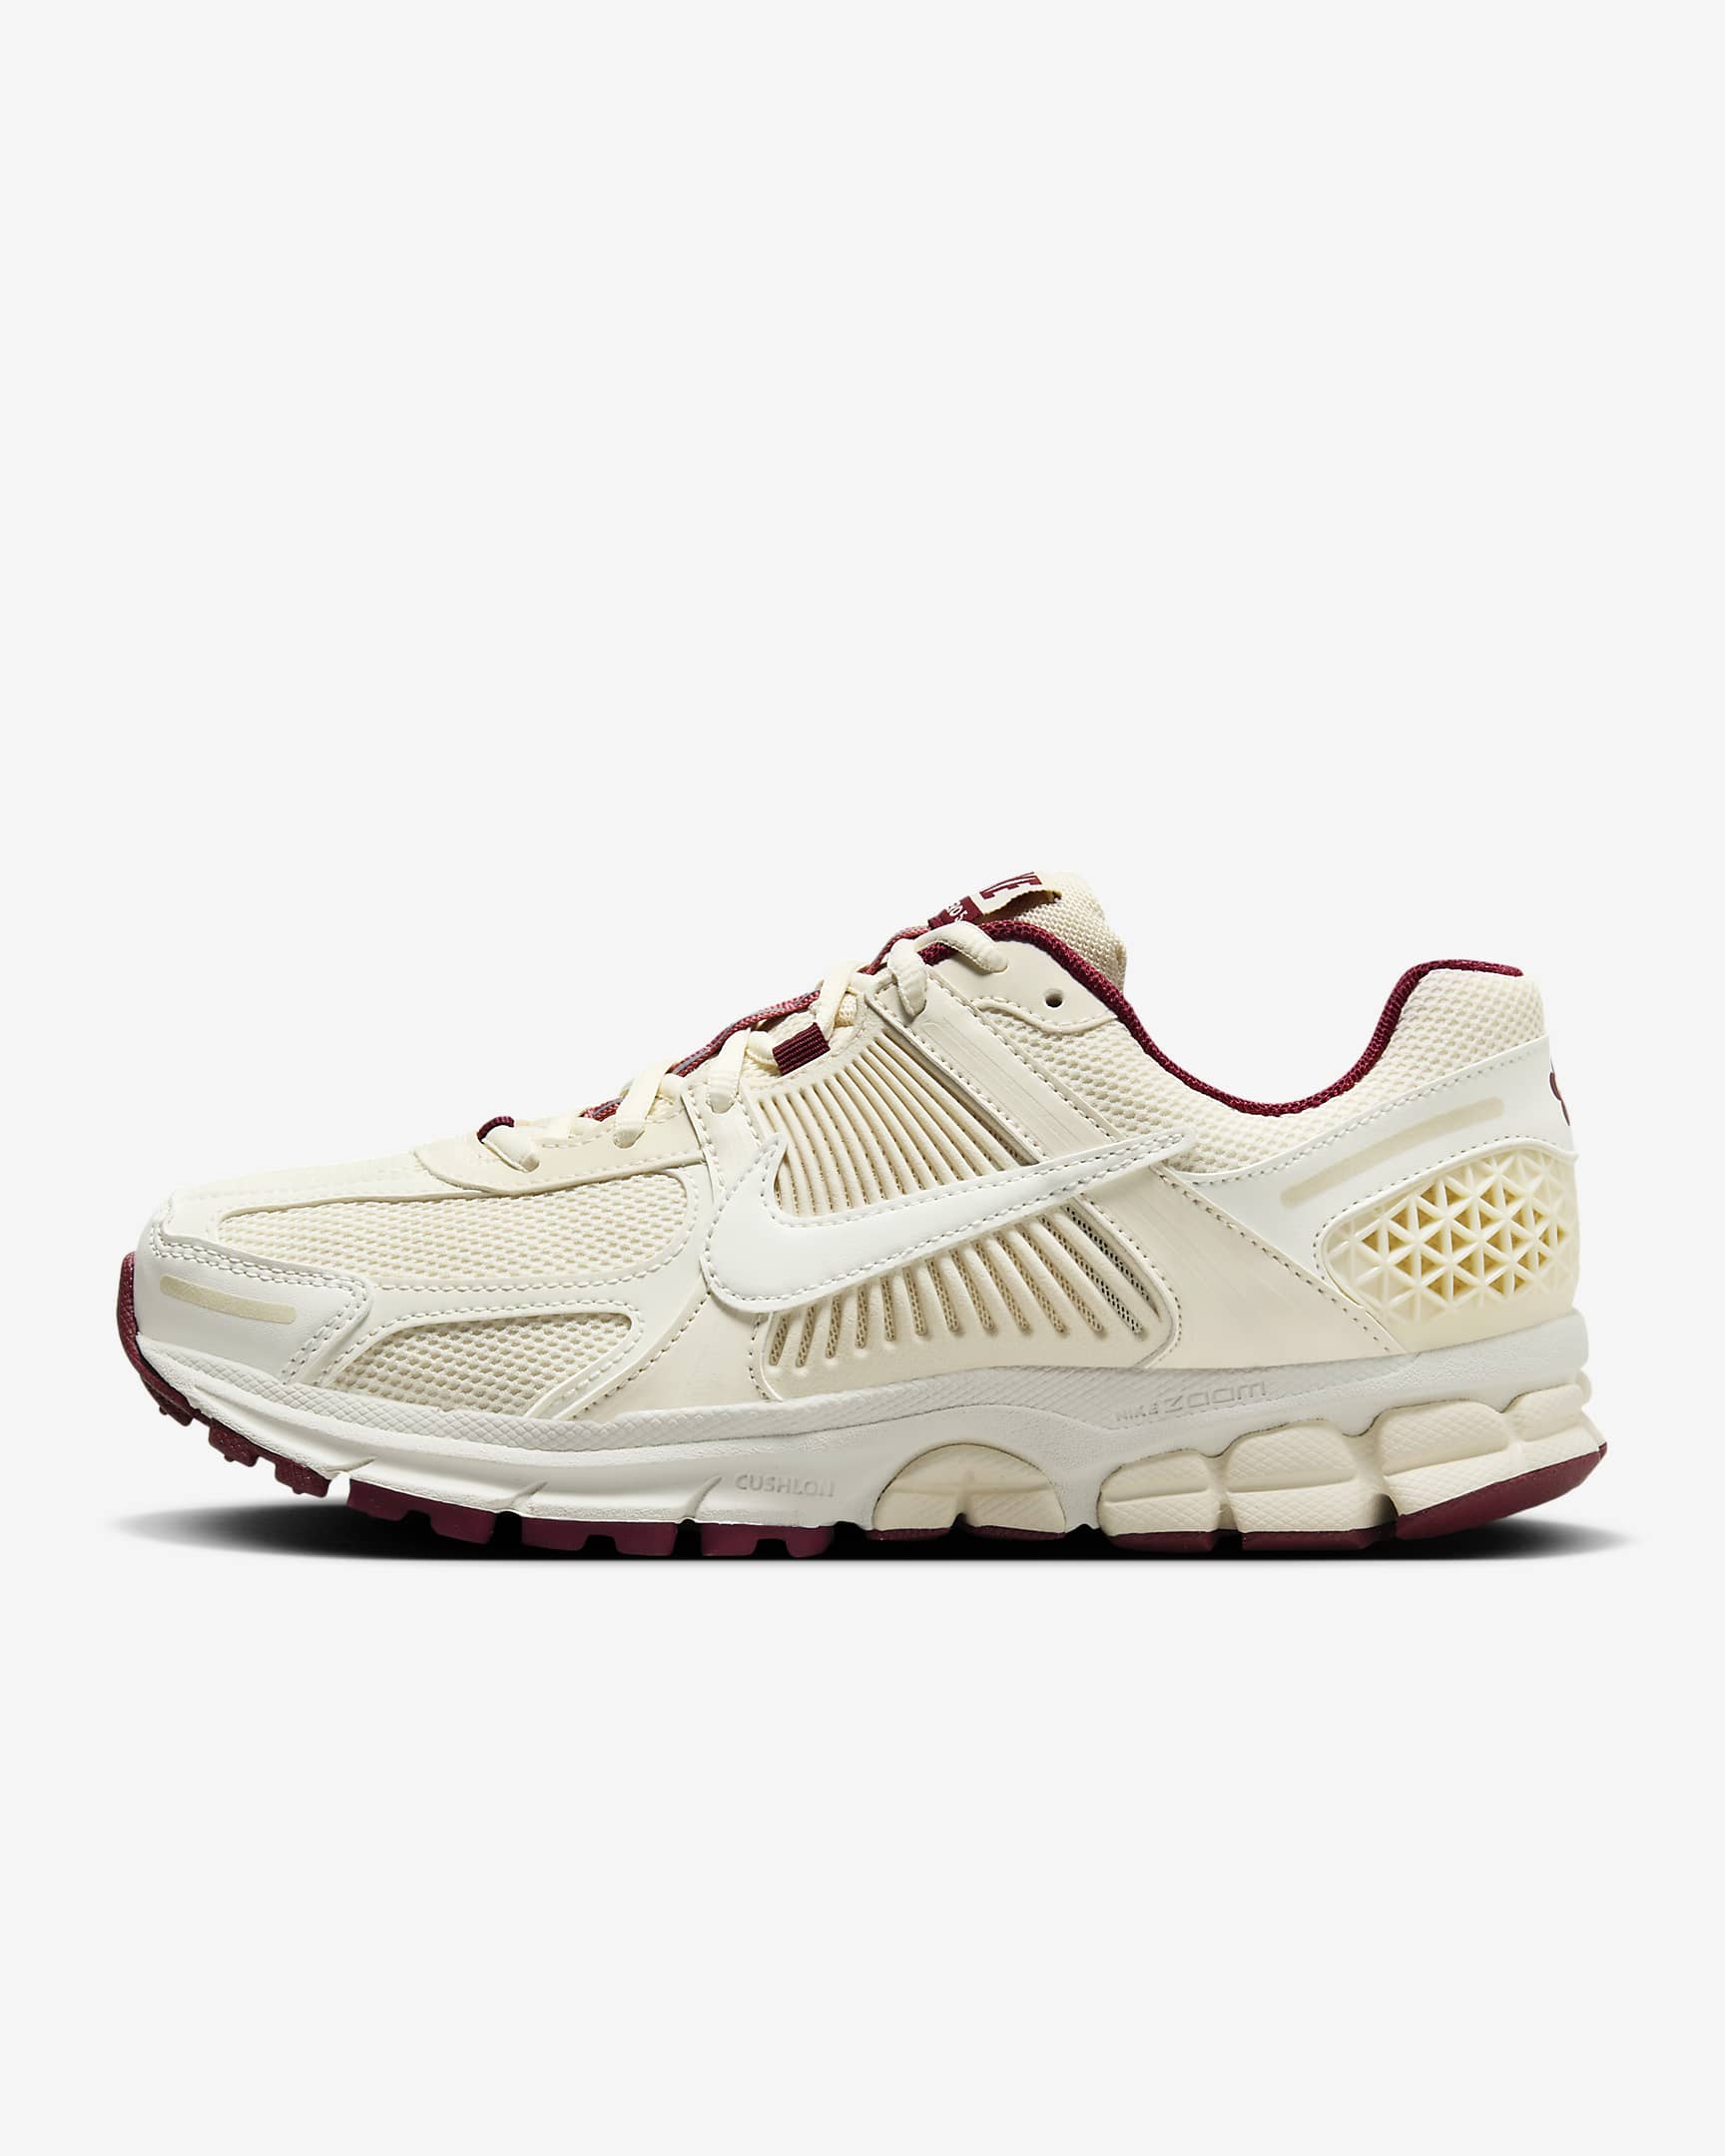 Nike Zoom Vomero 5 Women's Shoes - Sail/Pale Ivory/Team Red/Sail